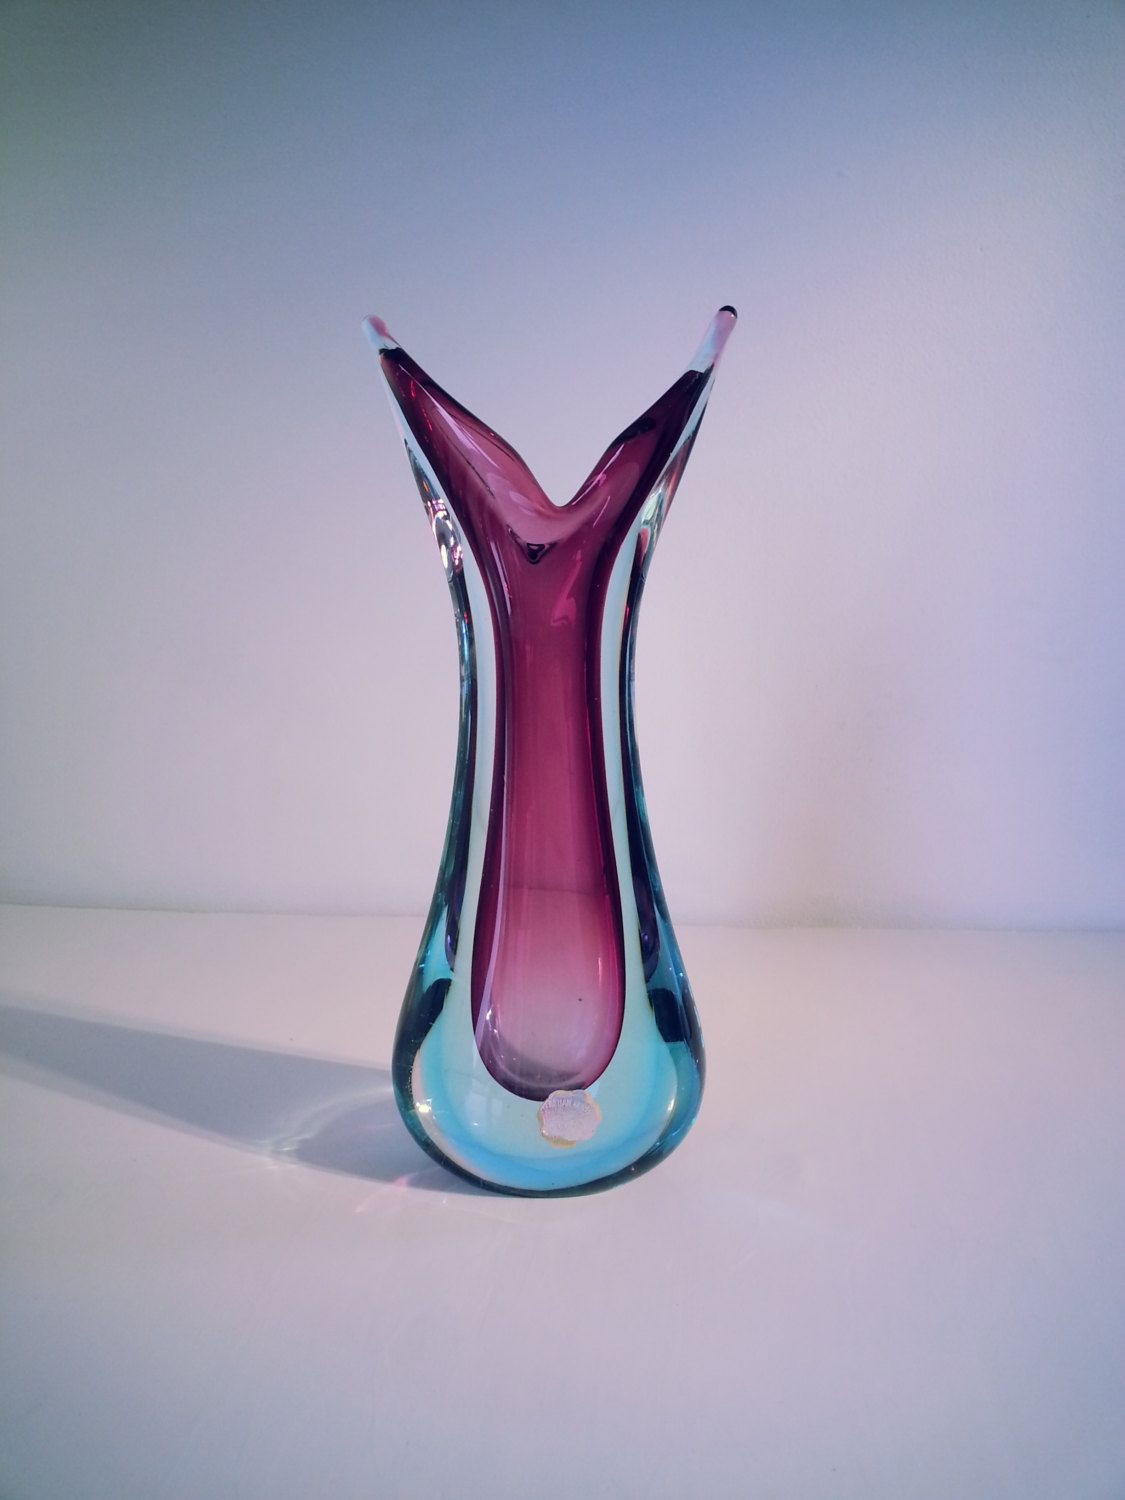 21 Recommended How to Identify Murano Glass Vase 2024 free download how to identify murano glass vase of italian glass vase gallery big murano glass vase italy 1950 1955 regarding italian glass vase photos murano sommerso genuine venetian glass 1950 s 1960s 